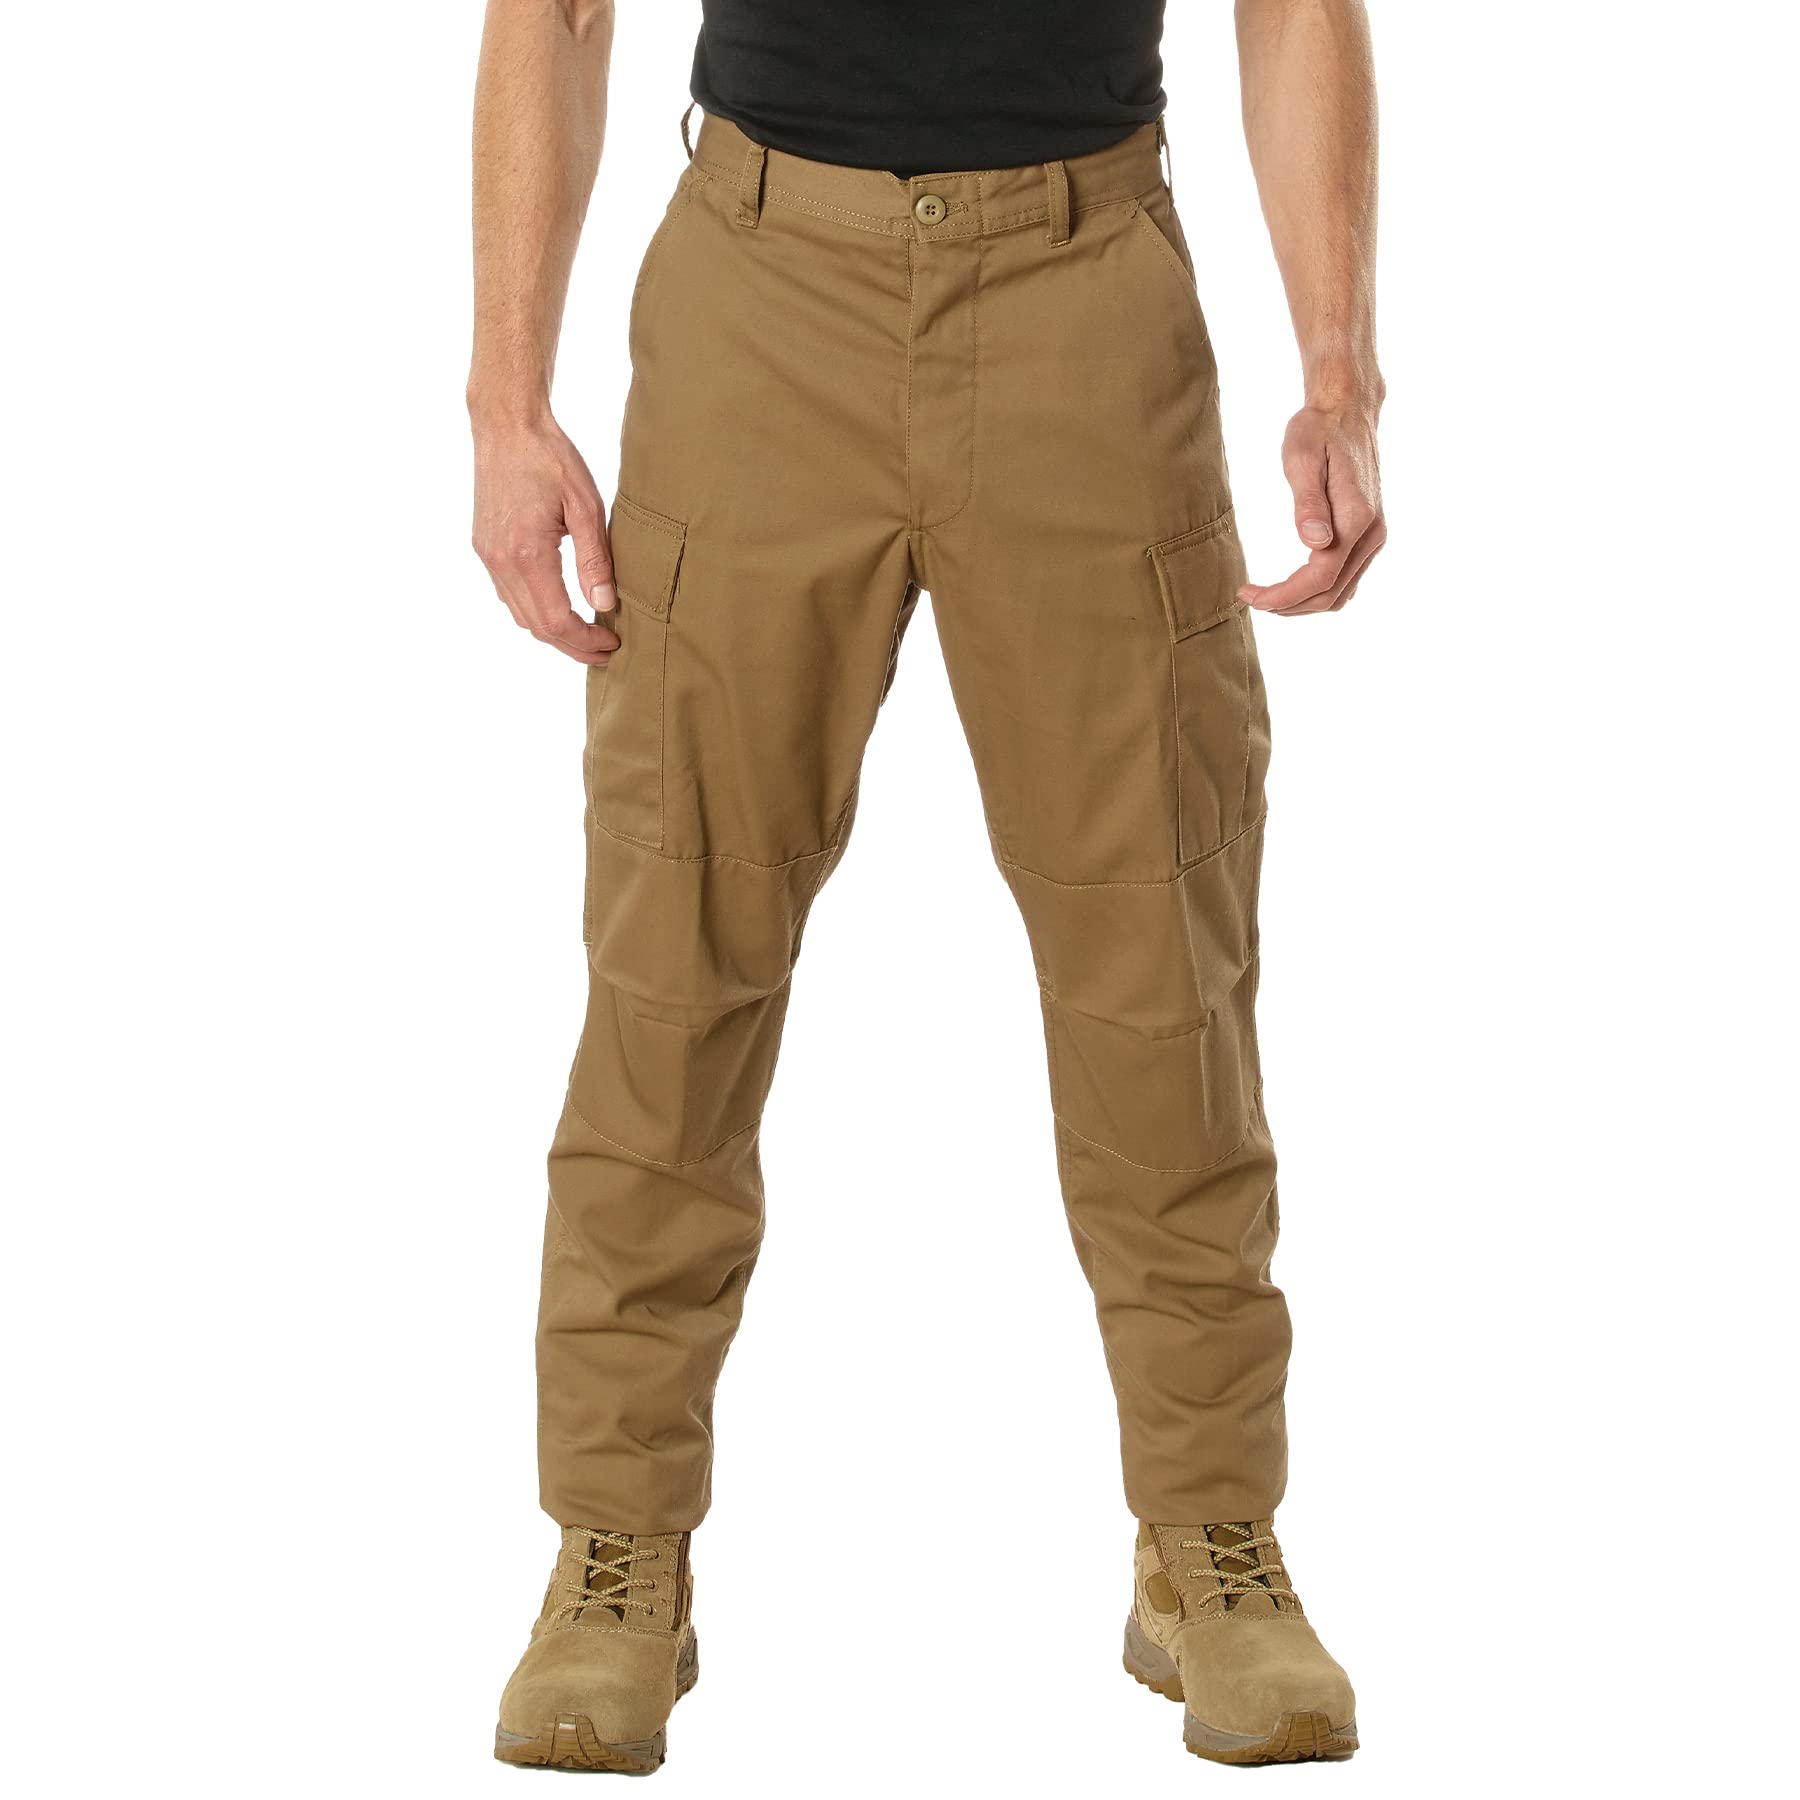 5.11 Tactical Station Wear Company Cargo 2.0 Pant | TheFireStore